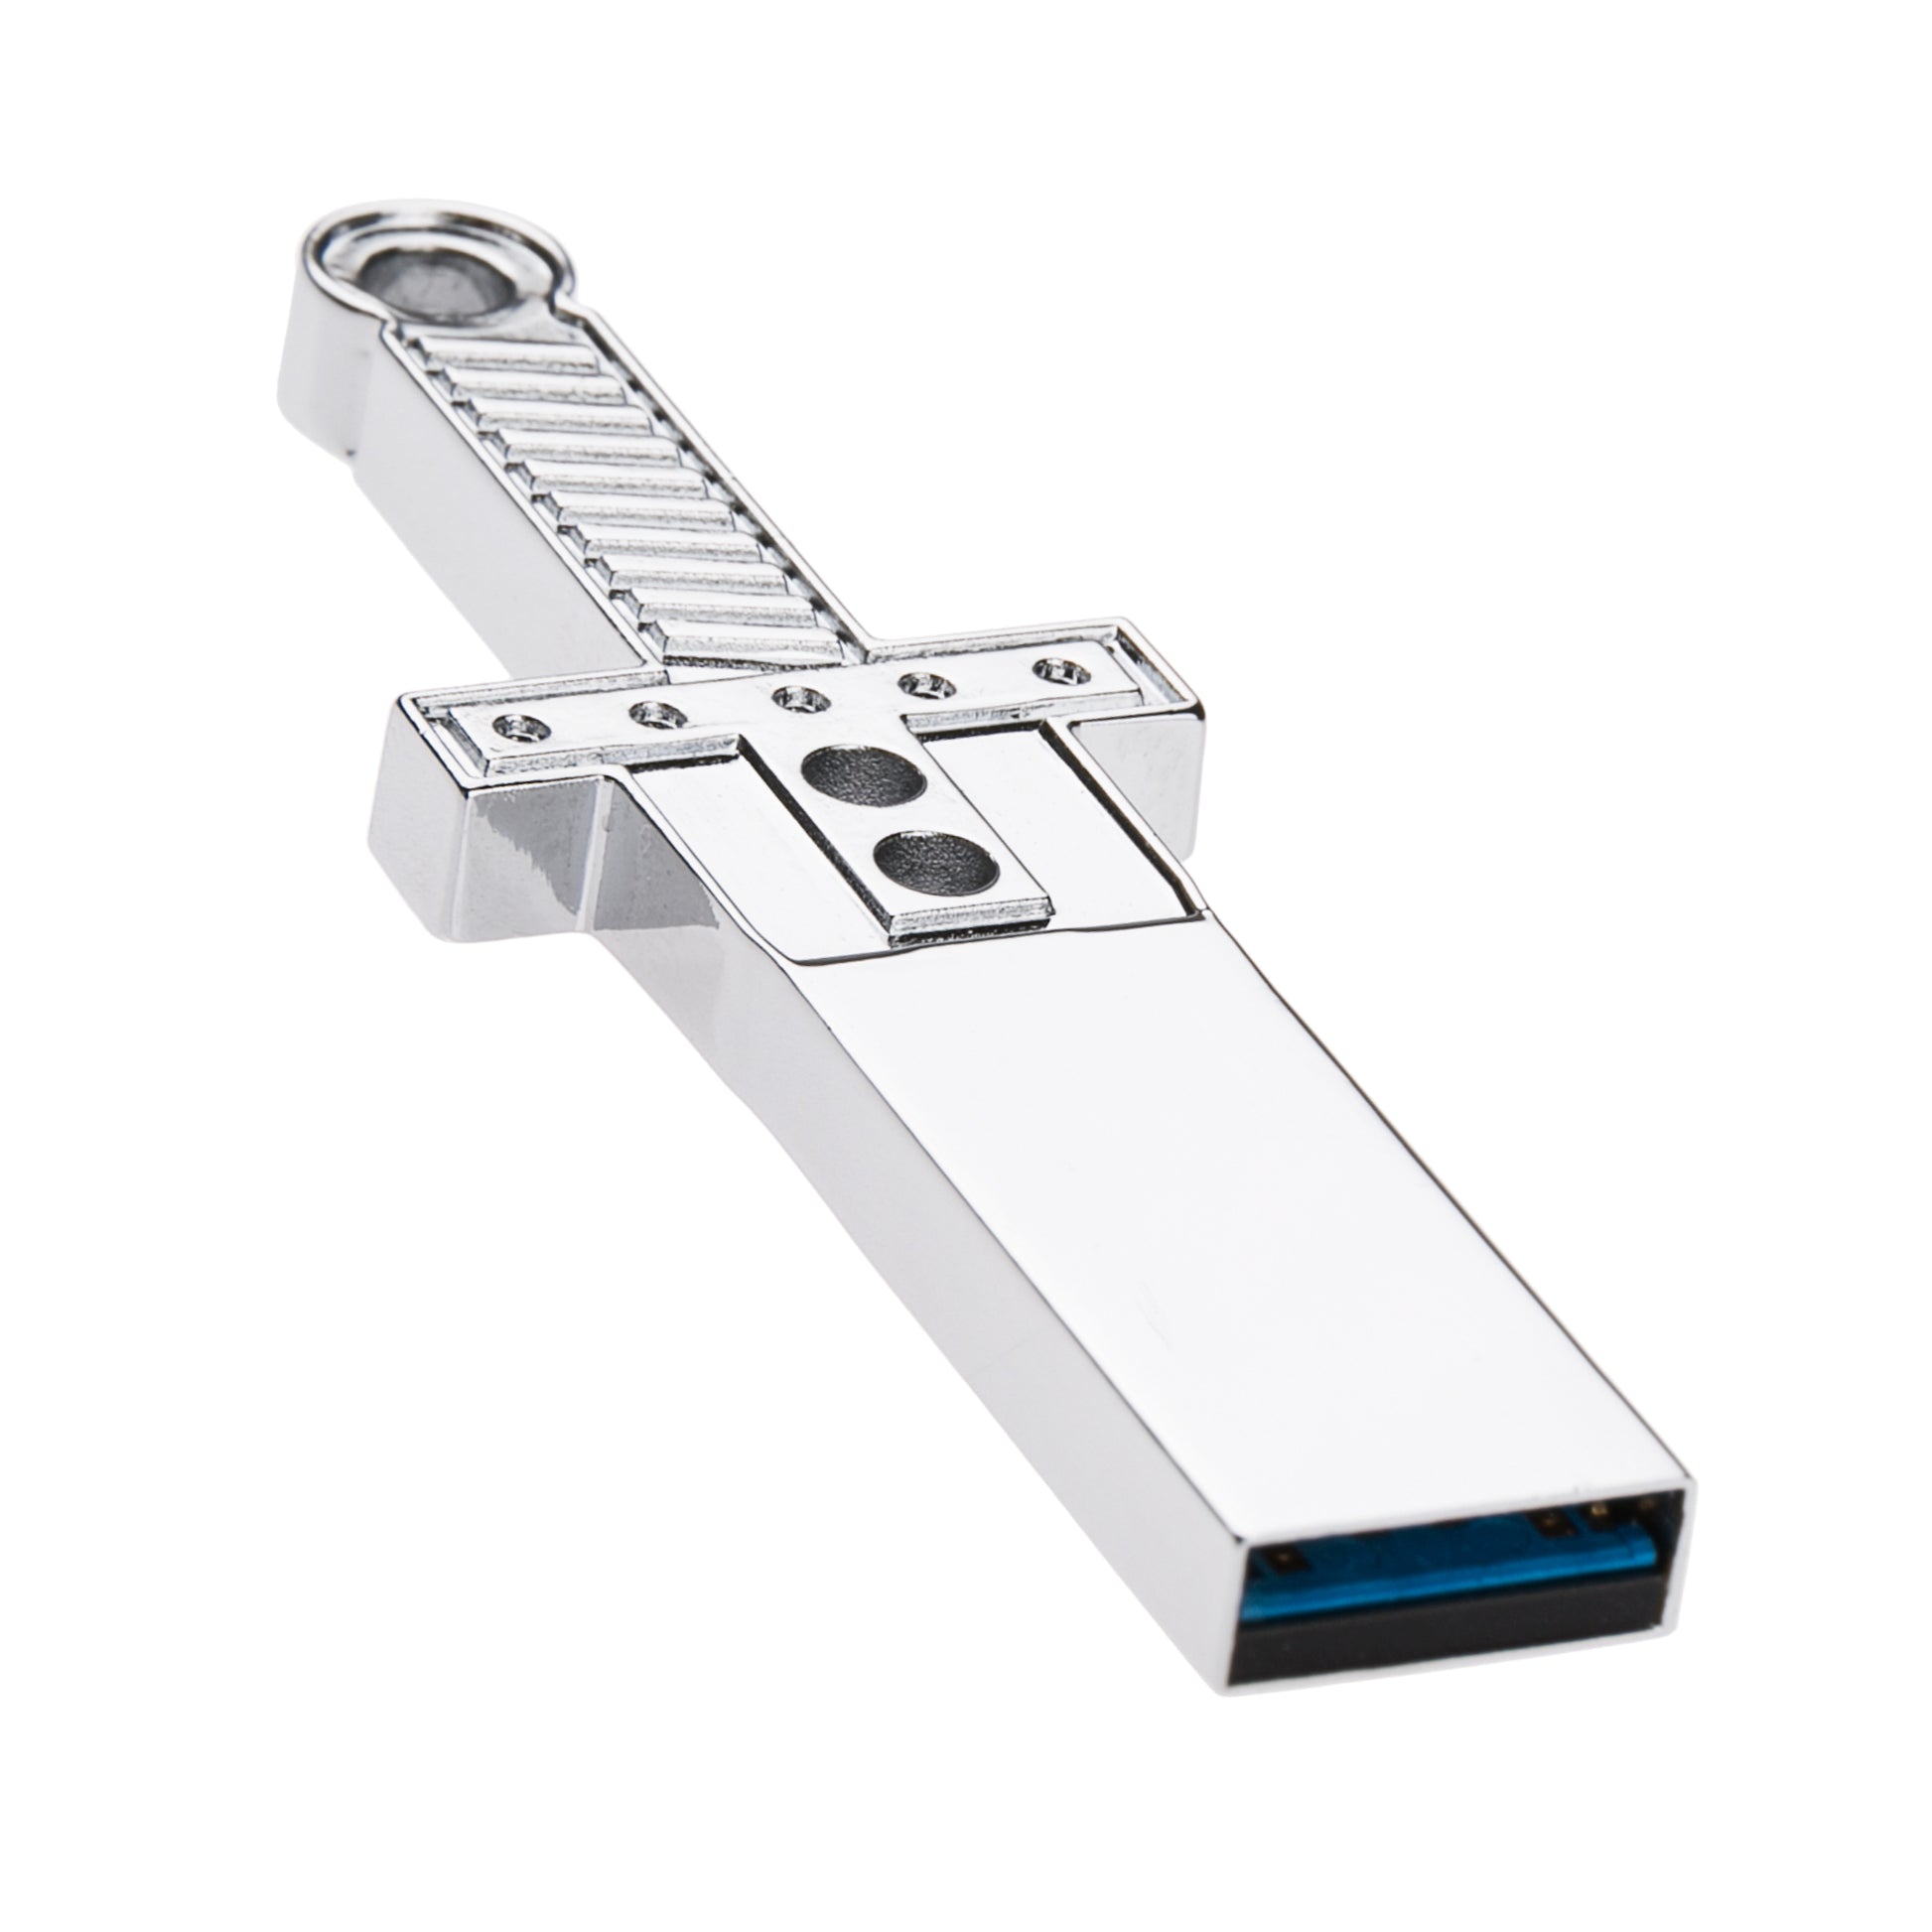 The SOLDIER's Sword (USB 3.0)